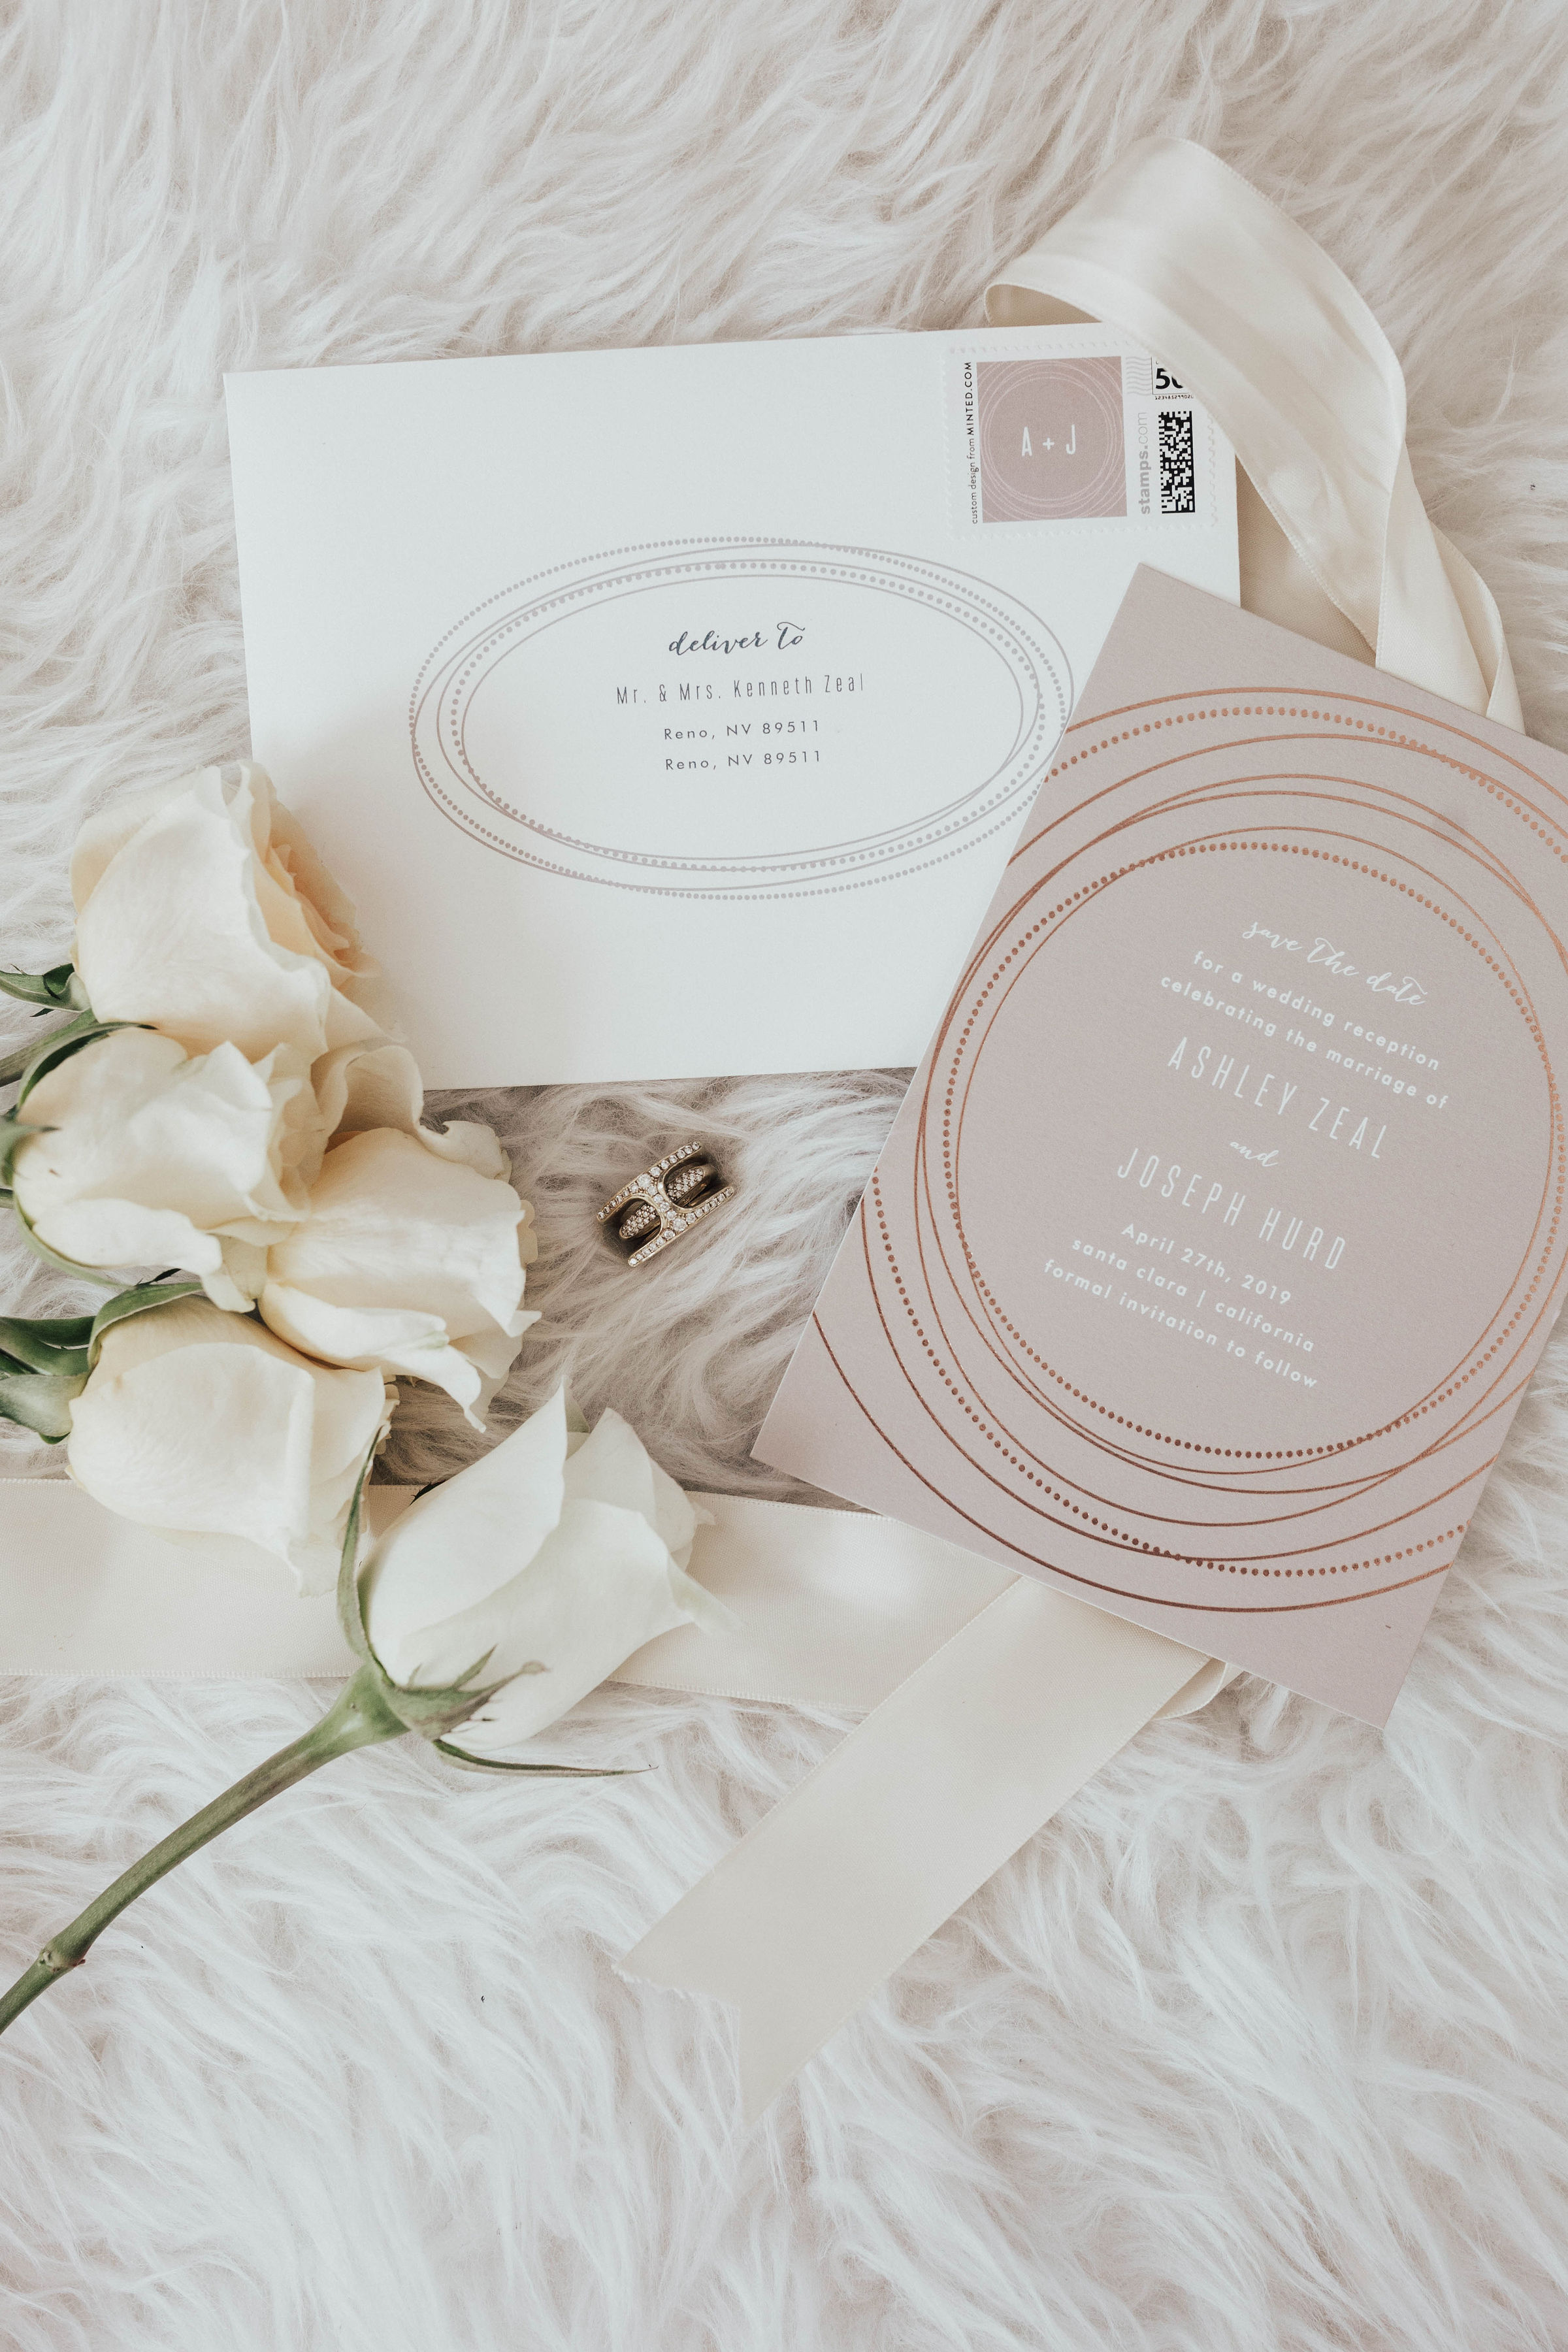 San Francisco Blogger, Ashley Zeal from Two Peas in a Prada shares her wedding save the dates from Minted Weddings. Plus a 25% off code!